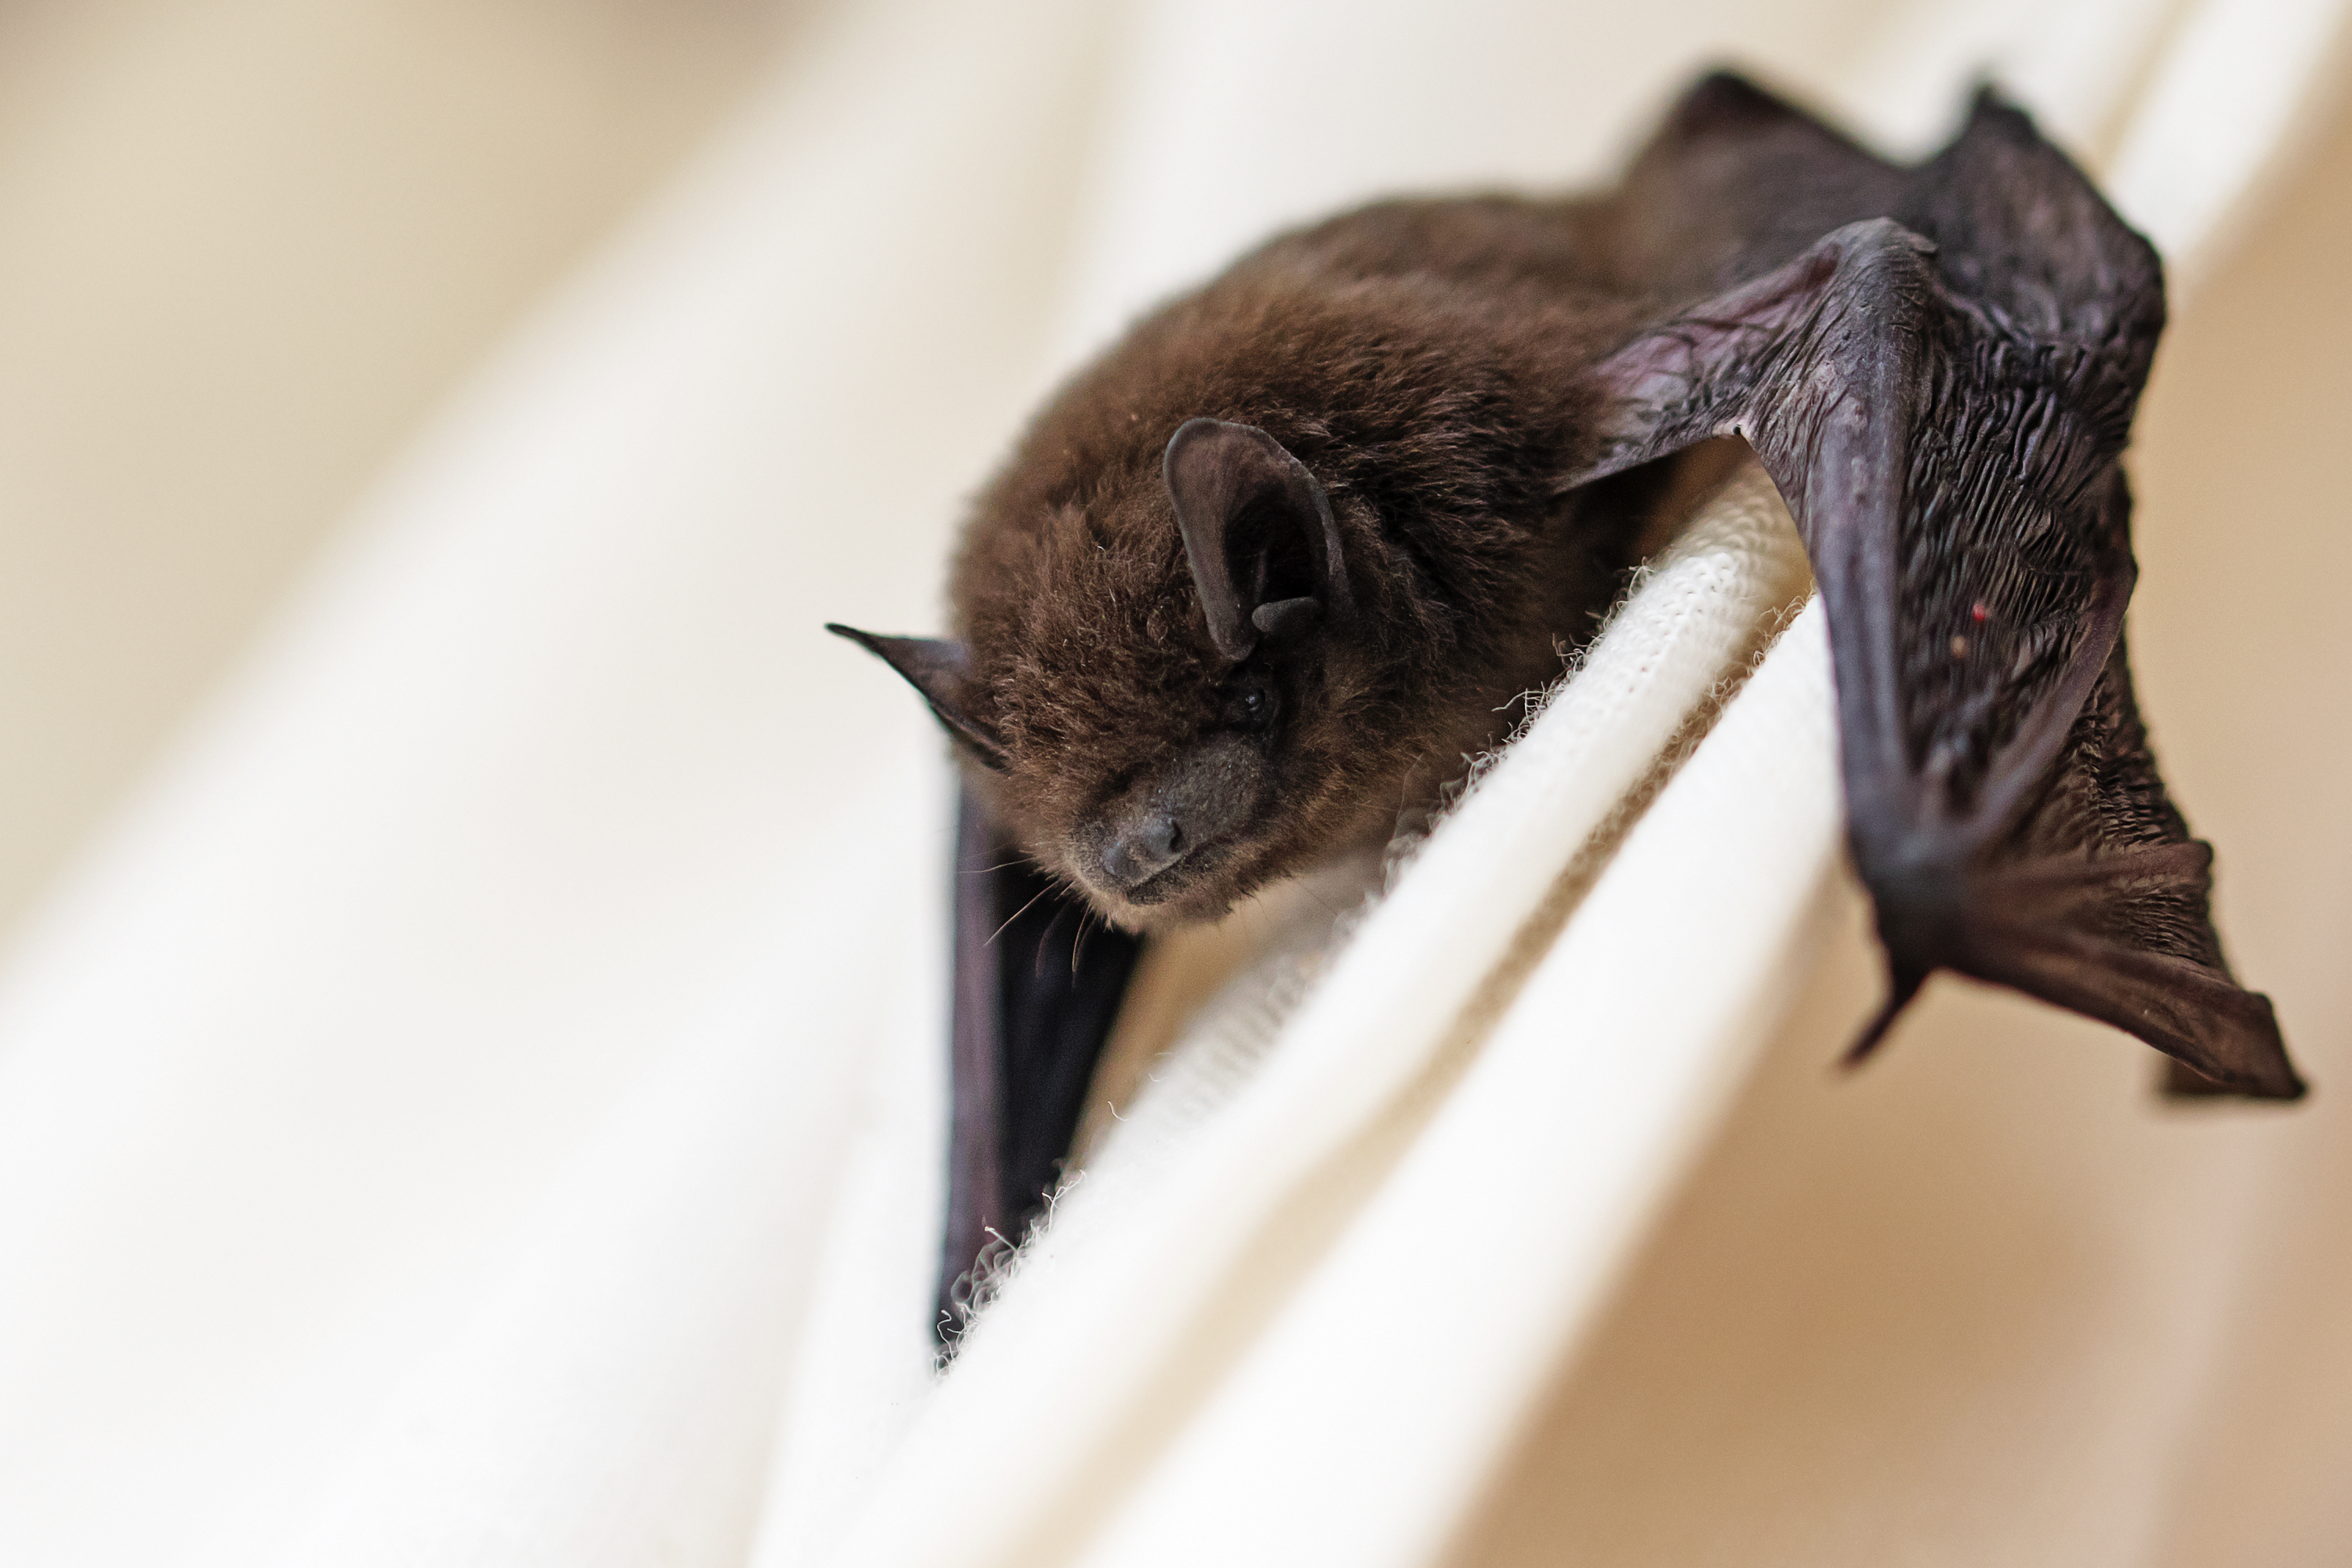 After positive rabies case, health officials say you shouldn't let a bat out of your house if it gets stuck